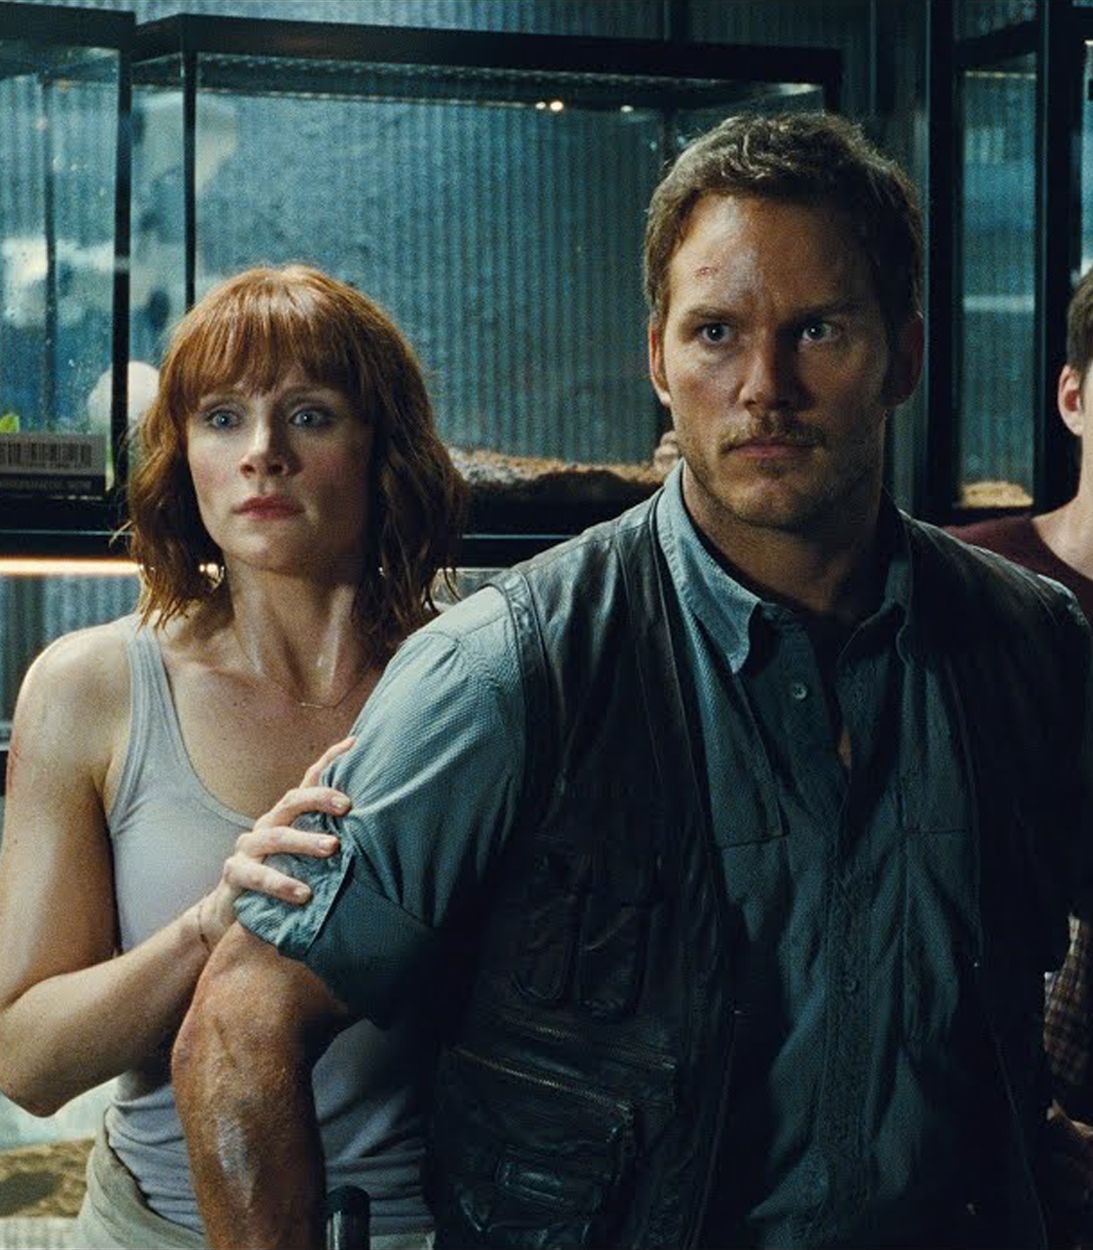 Claire and Owen in Jurassic World vertical